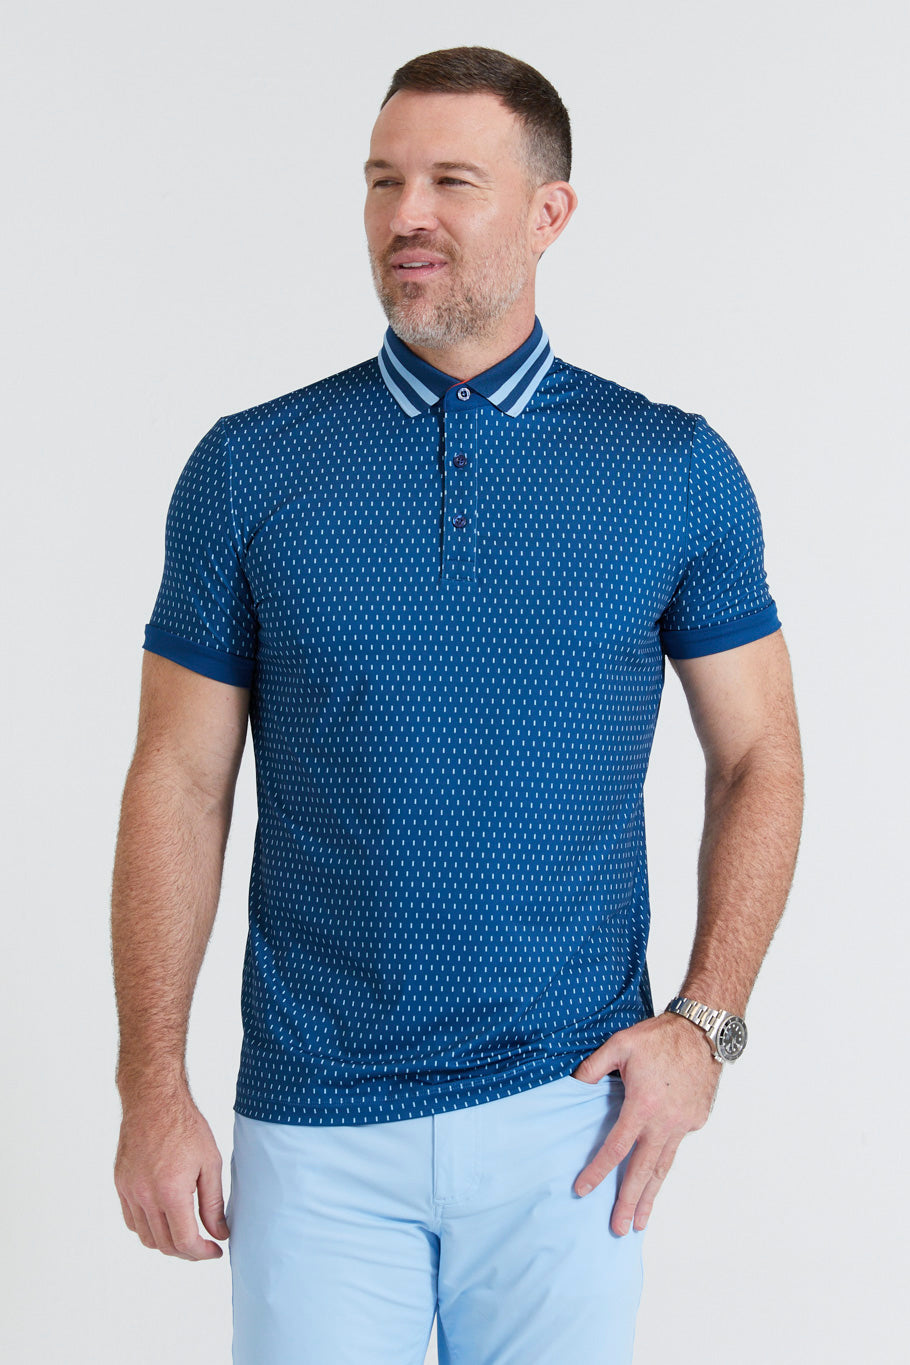 TCarver Polo in Admiral